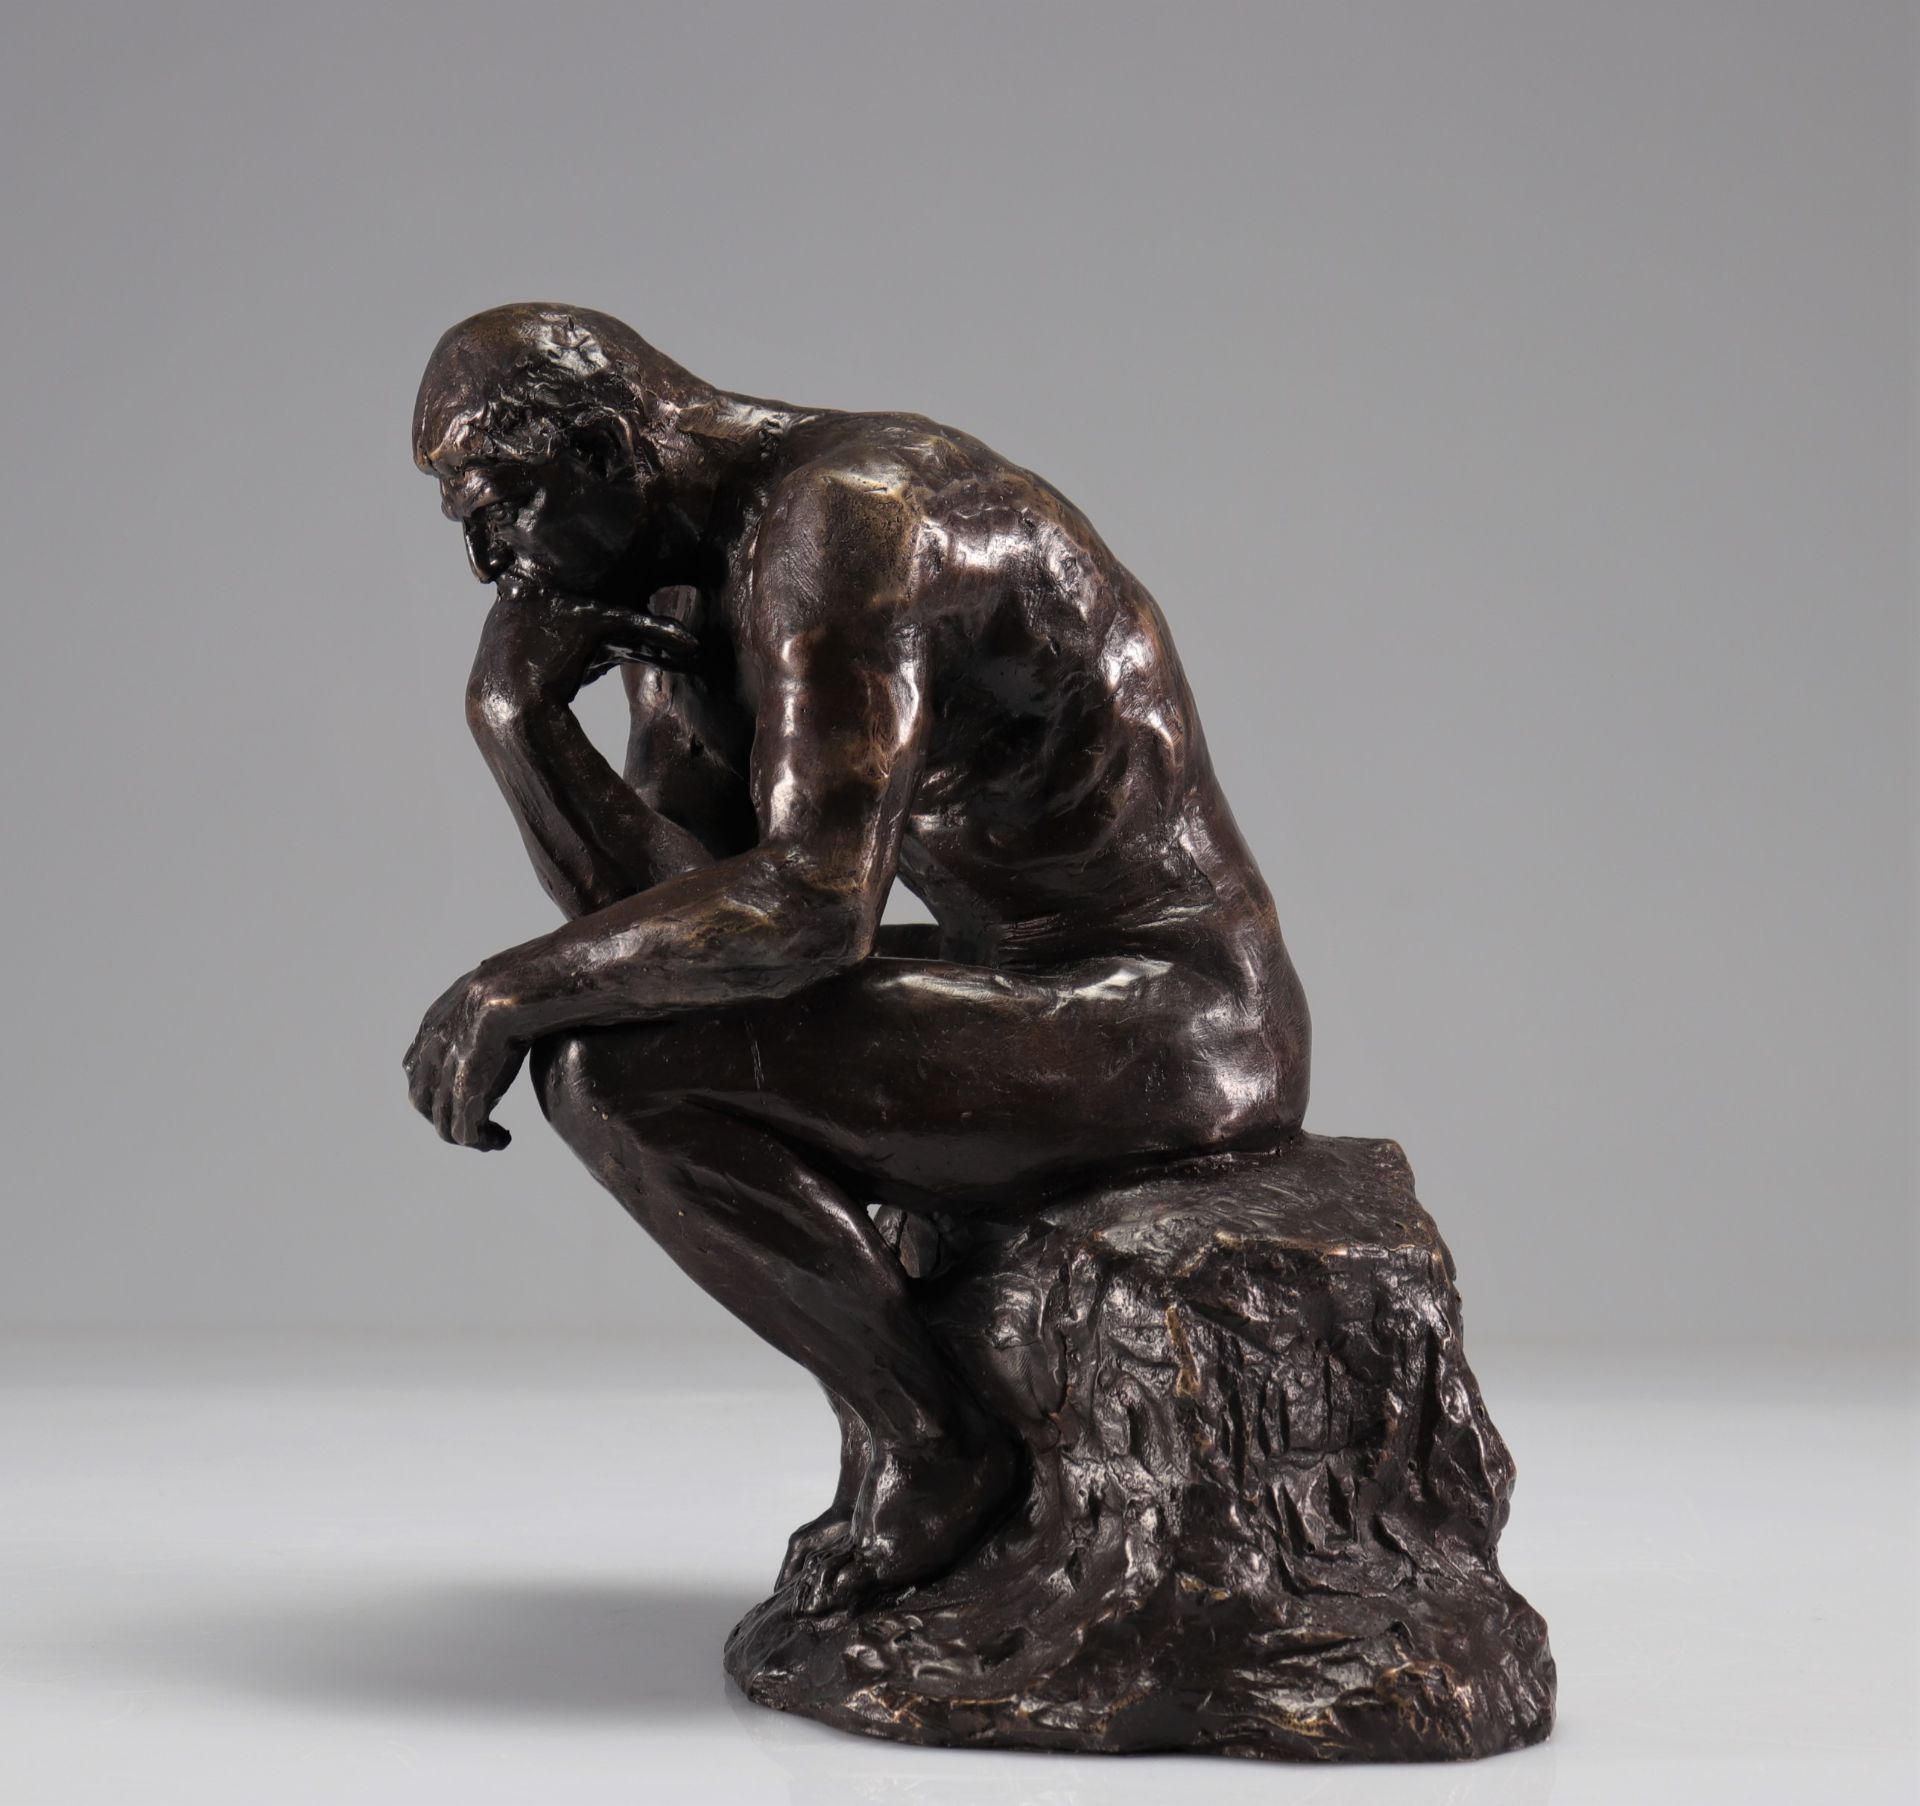 Auguste Rodin (After). " The Thinker ". Lost wax bronze with brown patina. Signed "Rodin" hollow. Be